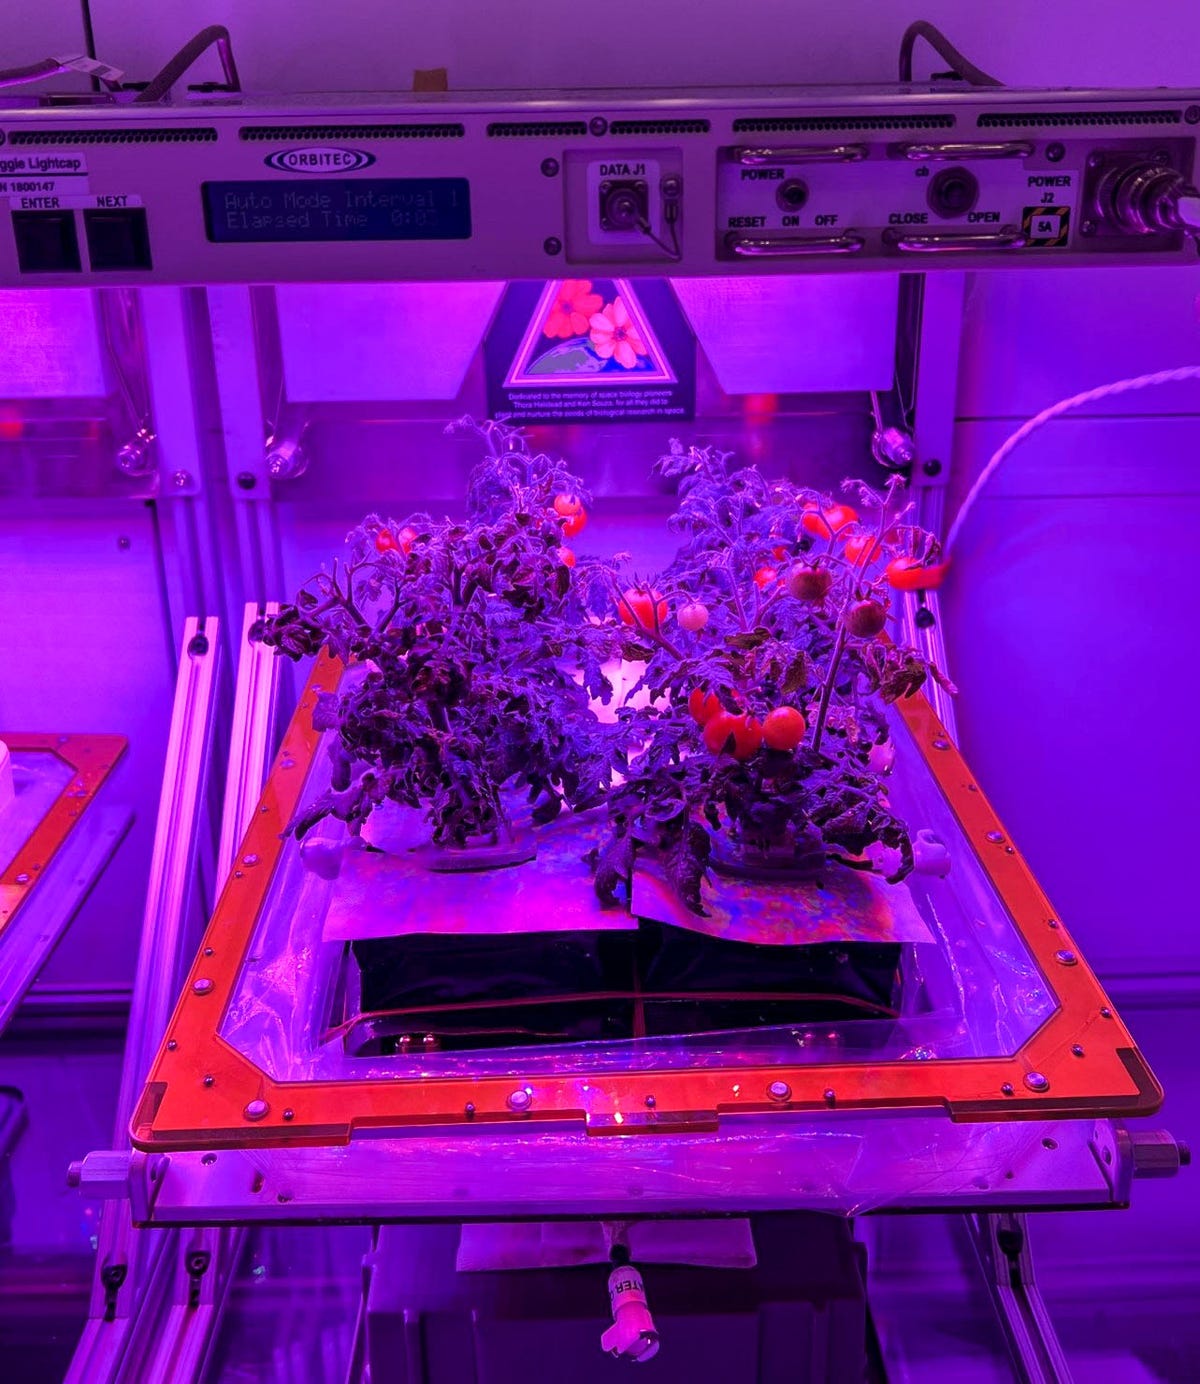 Tiny tomatoes are seen in a blueish-purple light growing in a scientific contraption.